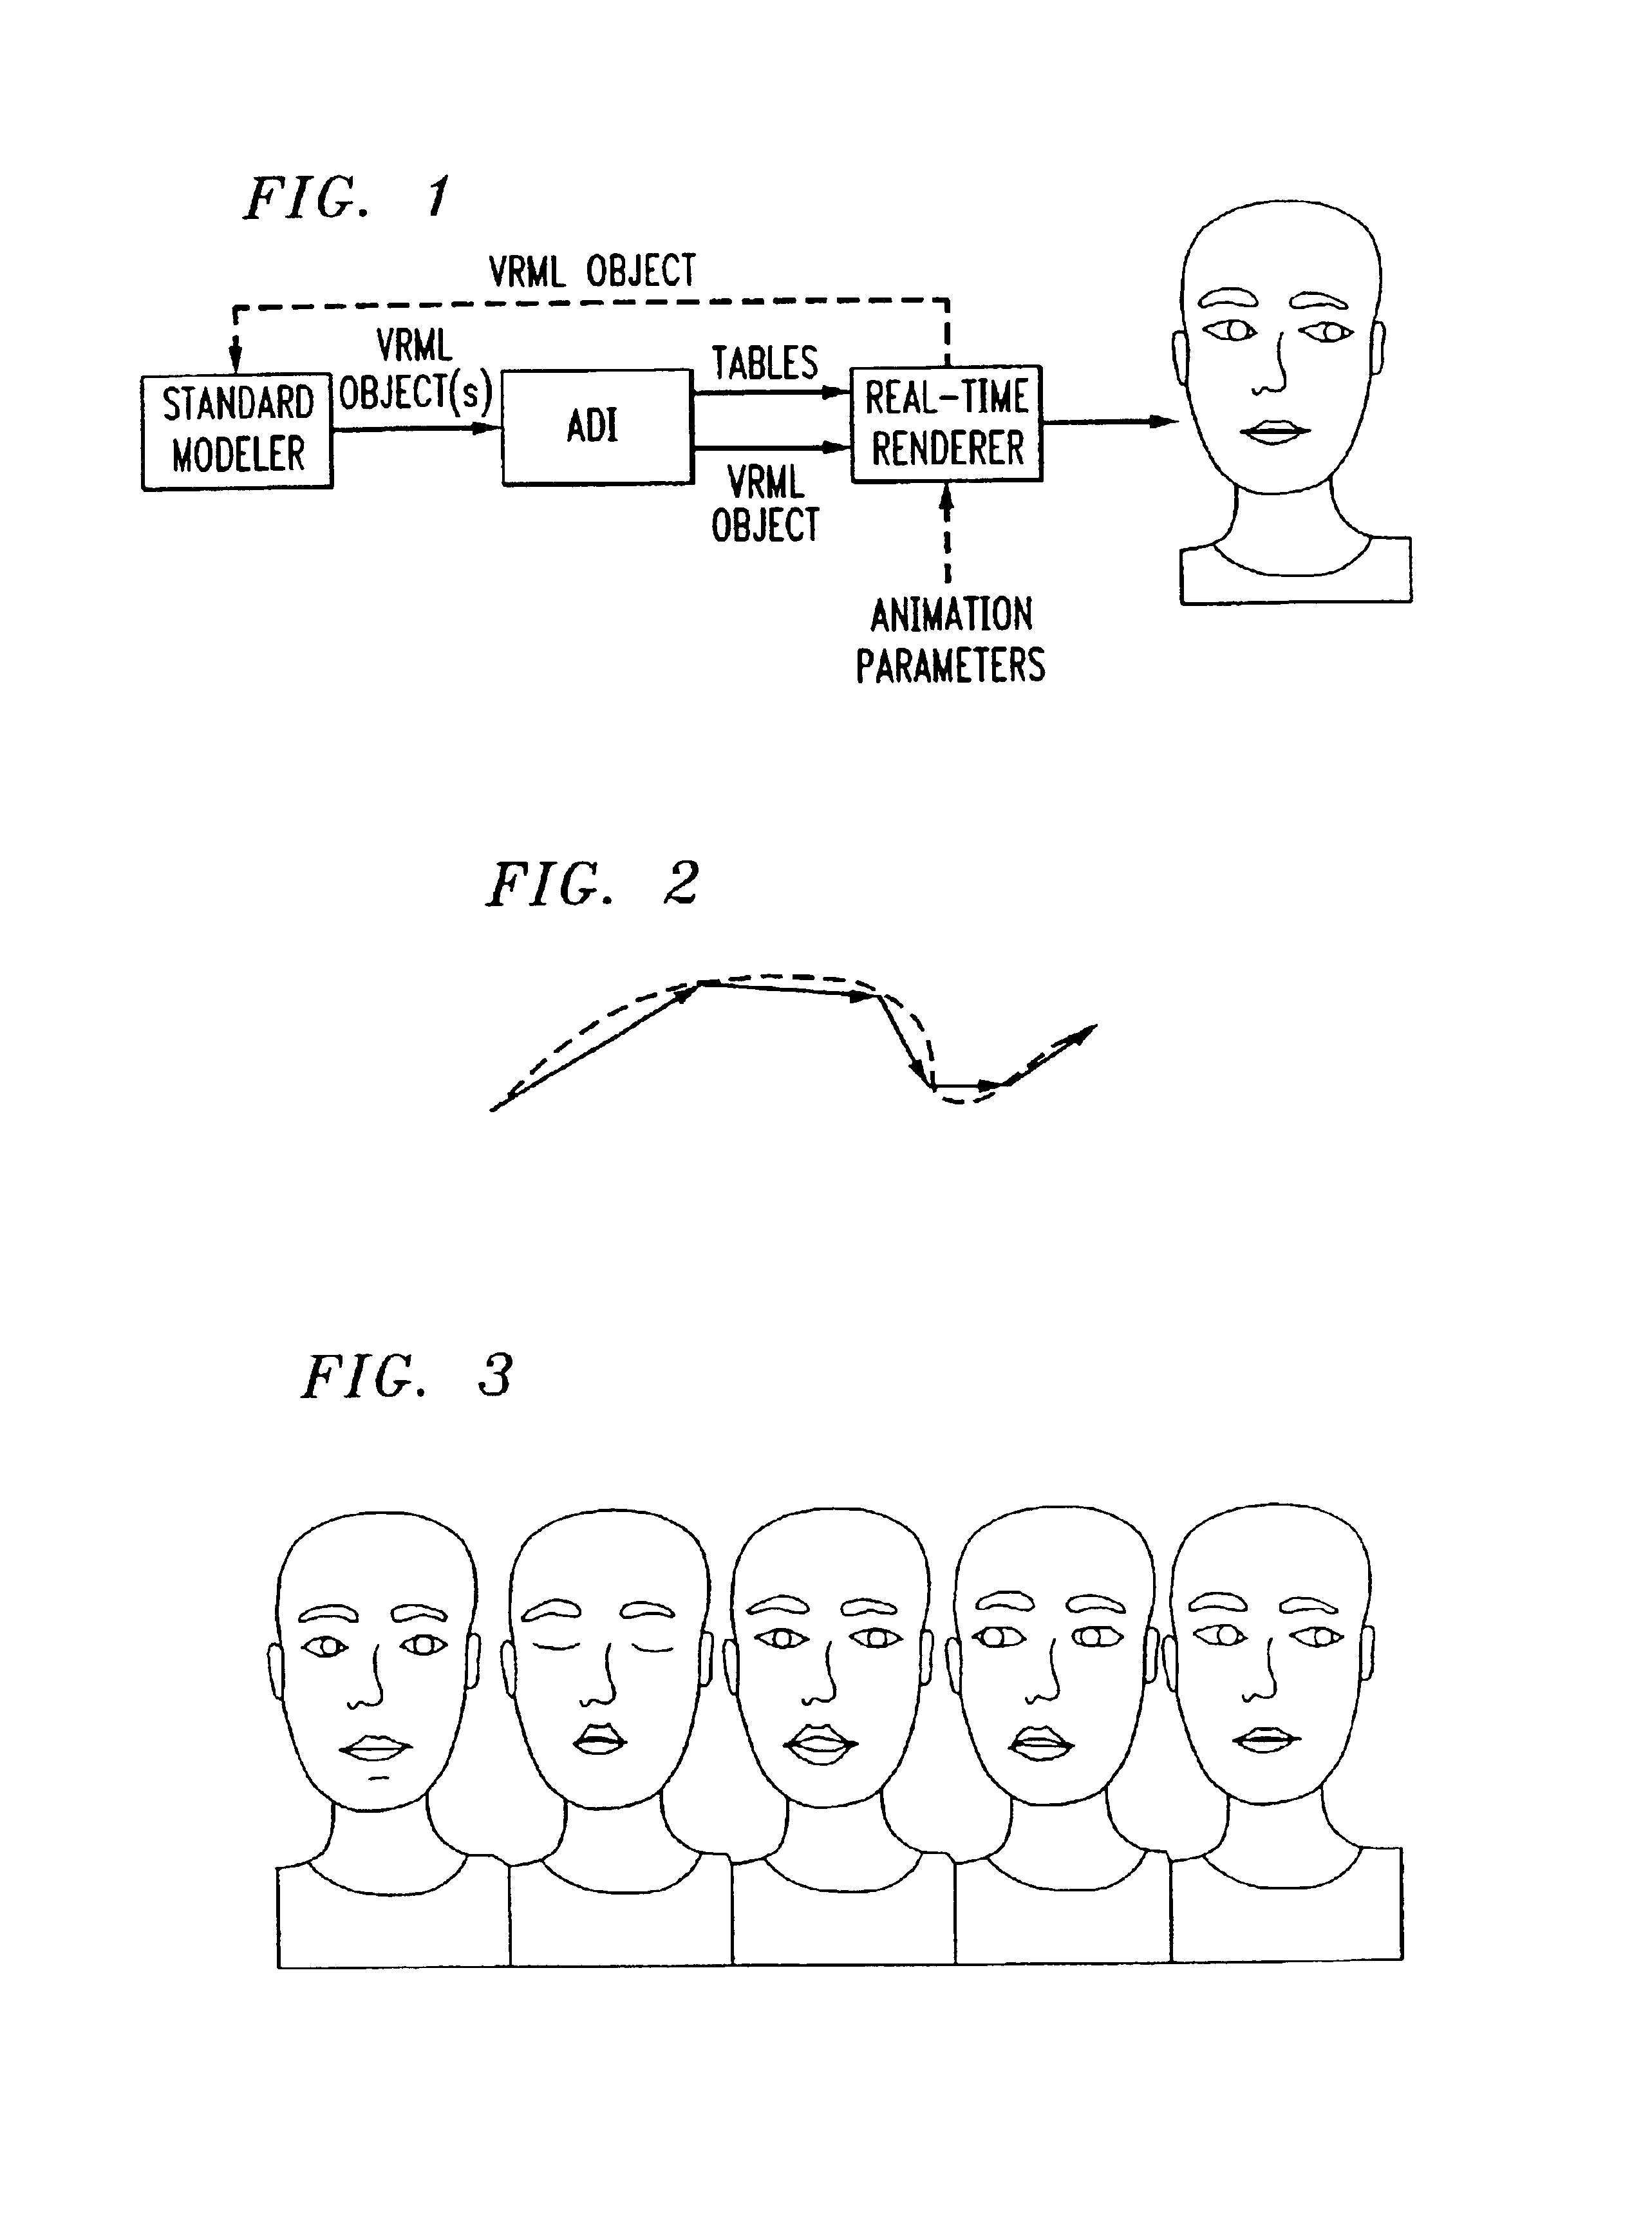 Method for defining MPEG 4 animation parameters for an animation definition interface